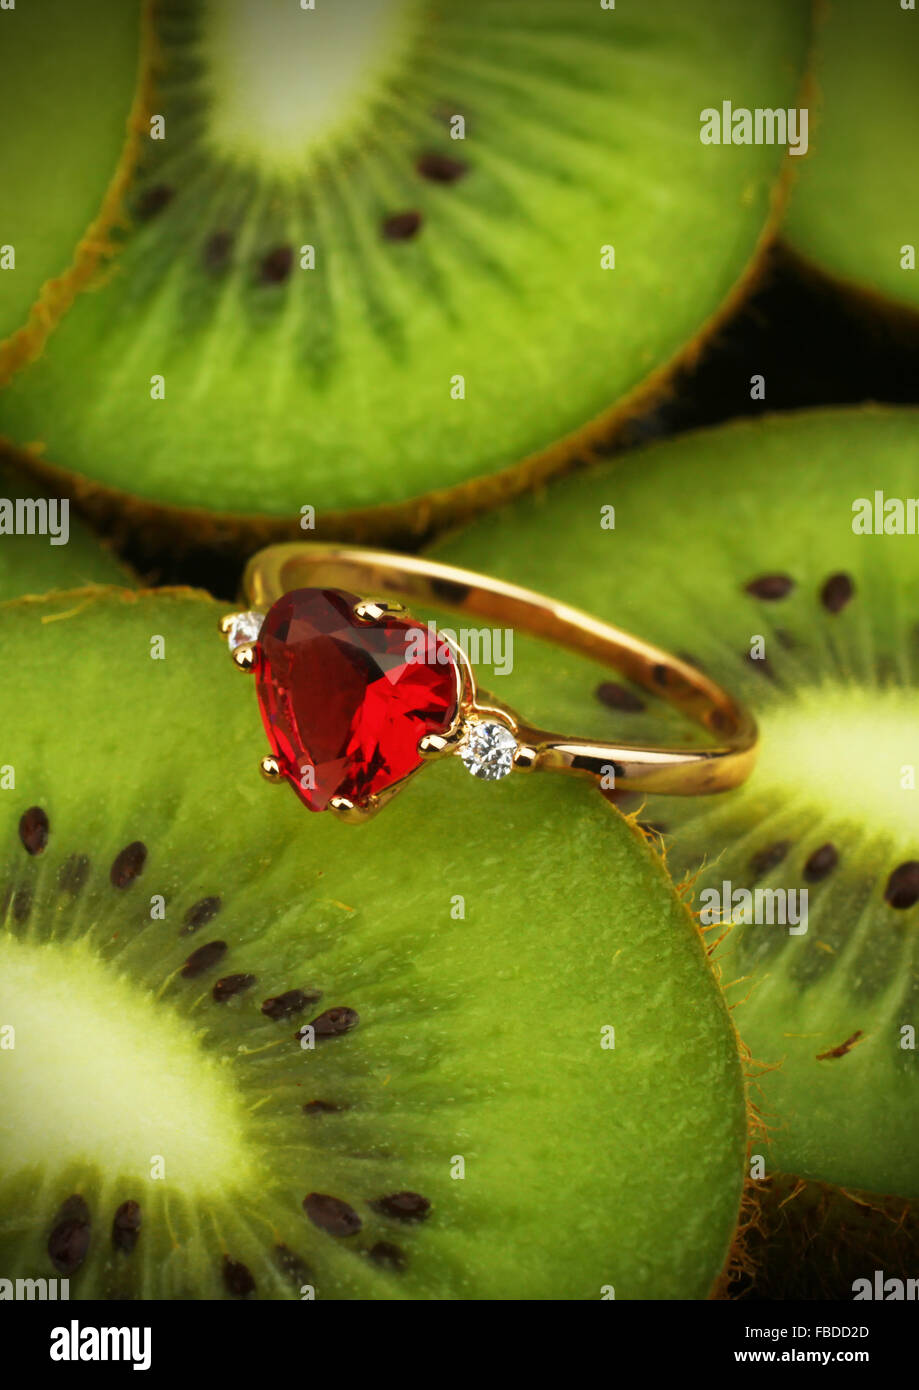 Golden ring with red gem on kiwi fruit background, vertical composition Stock Photo